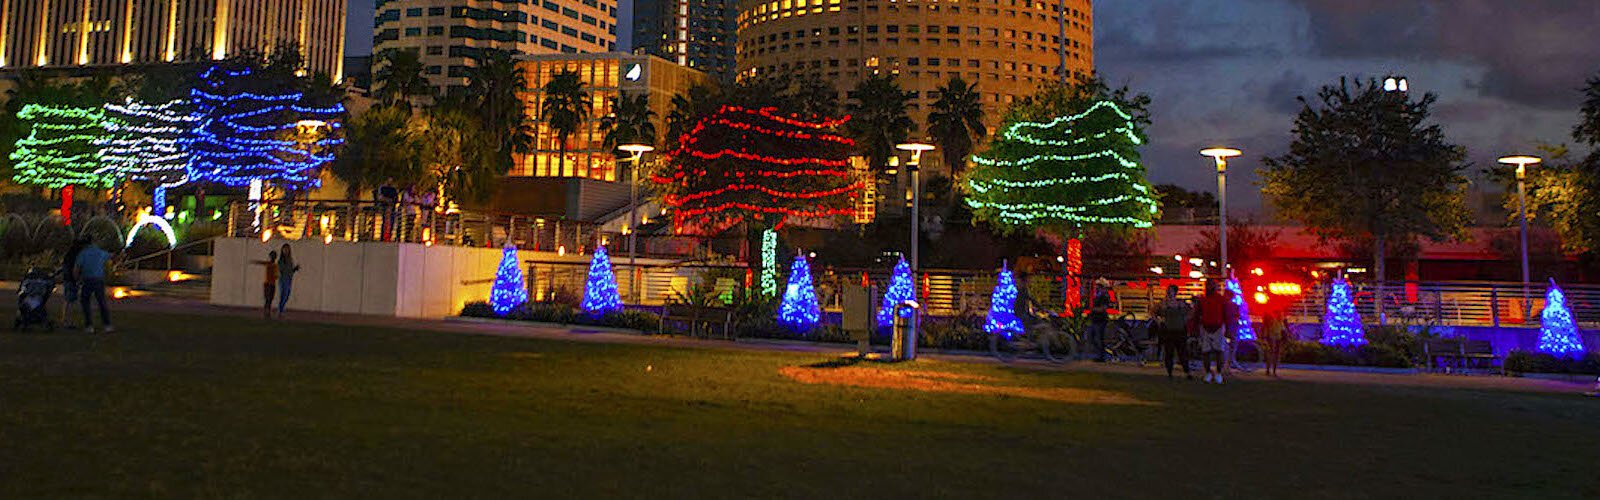 The scene at Winter Village along the Tampa Riverwalk in Downtown Tampa.